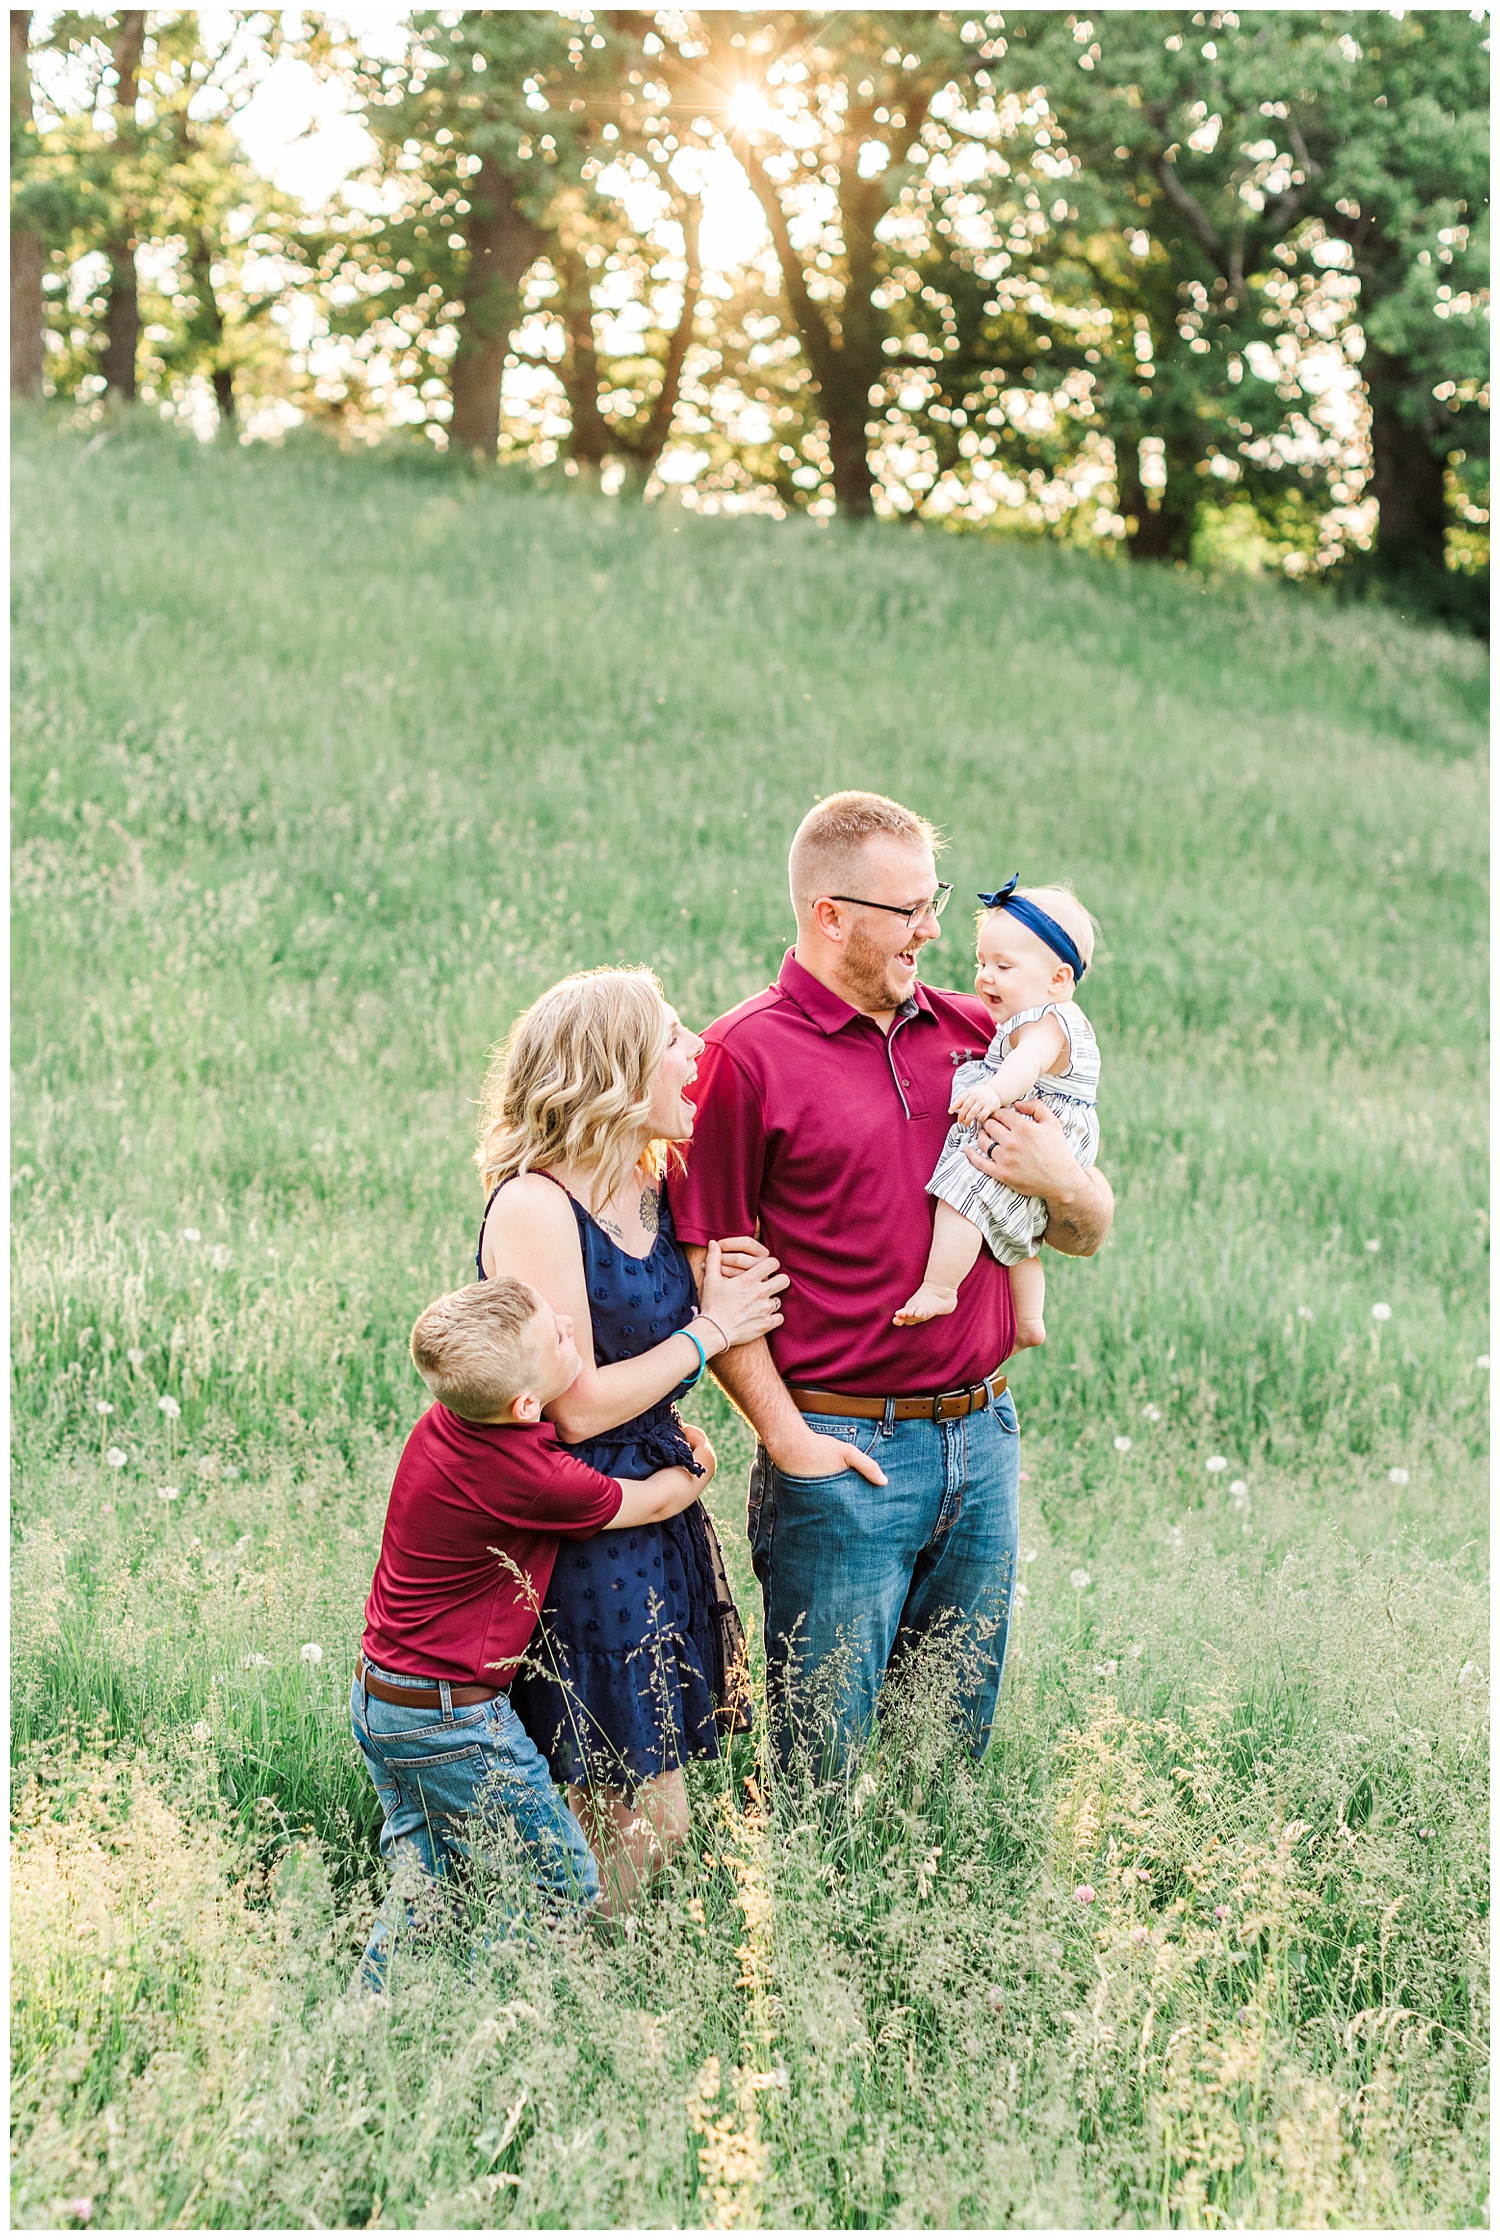 Golden hour family portraits in a grassy field with rolling hills in Iowa | CB Studio